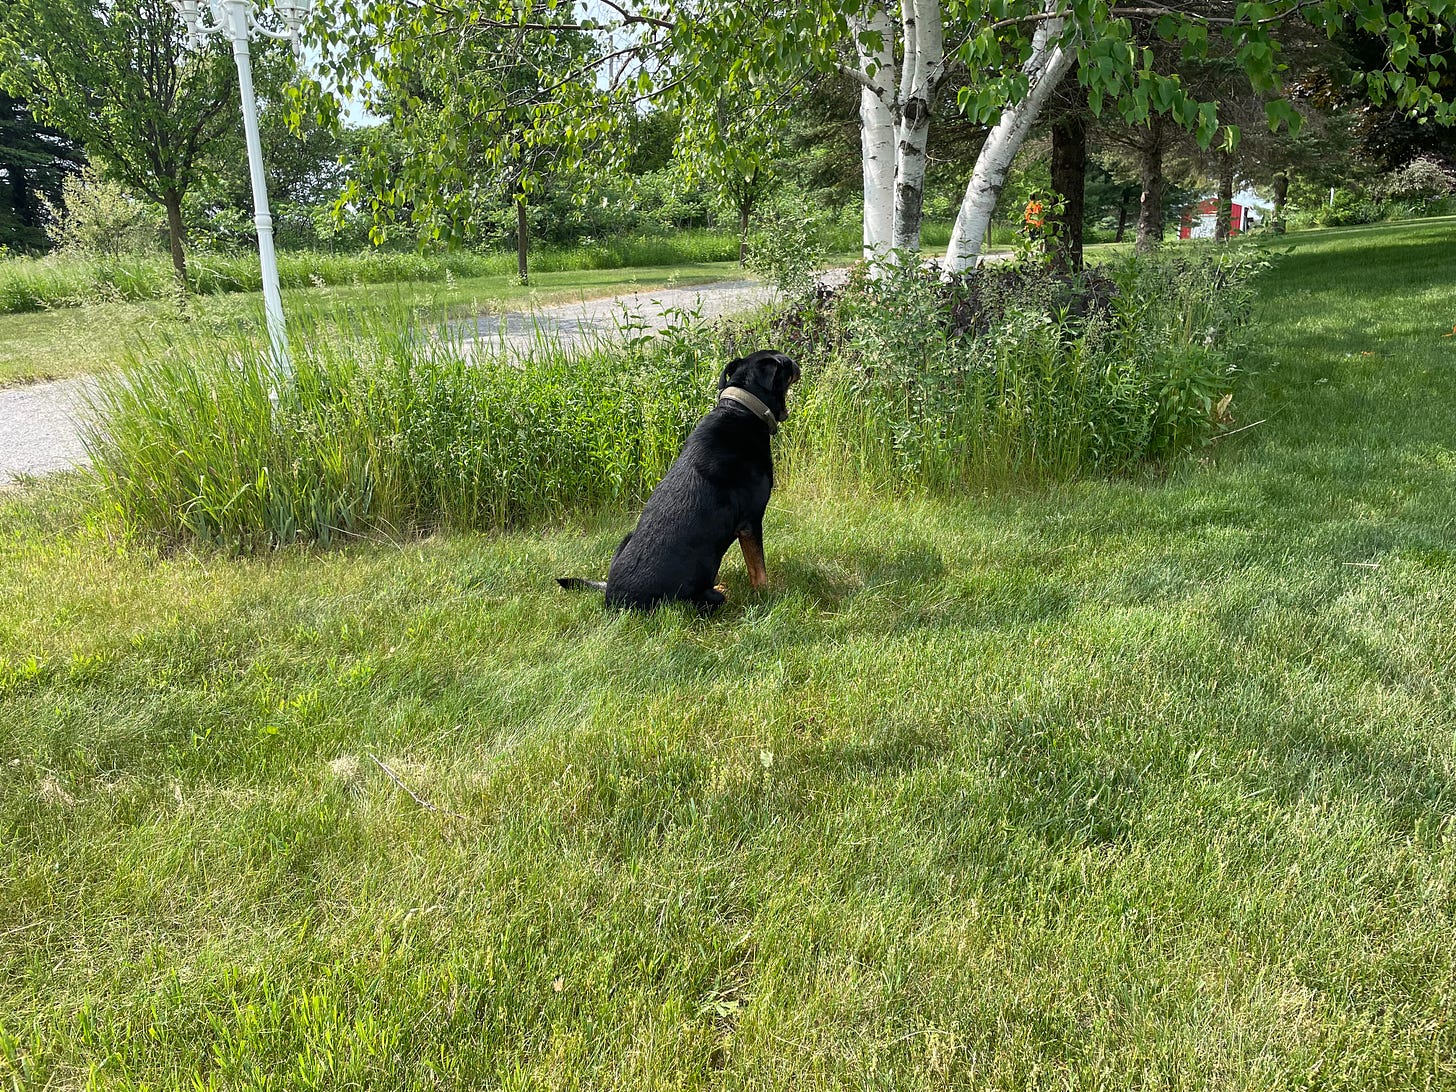 A picture of nature, with a black dog at the centre enjoying it all